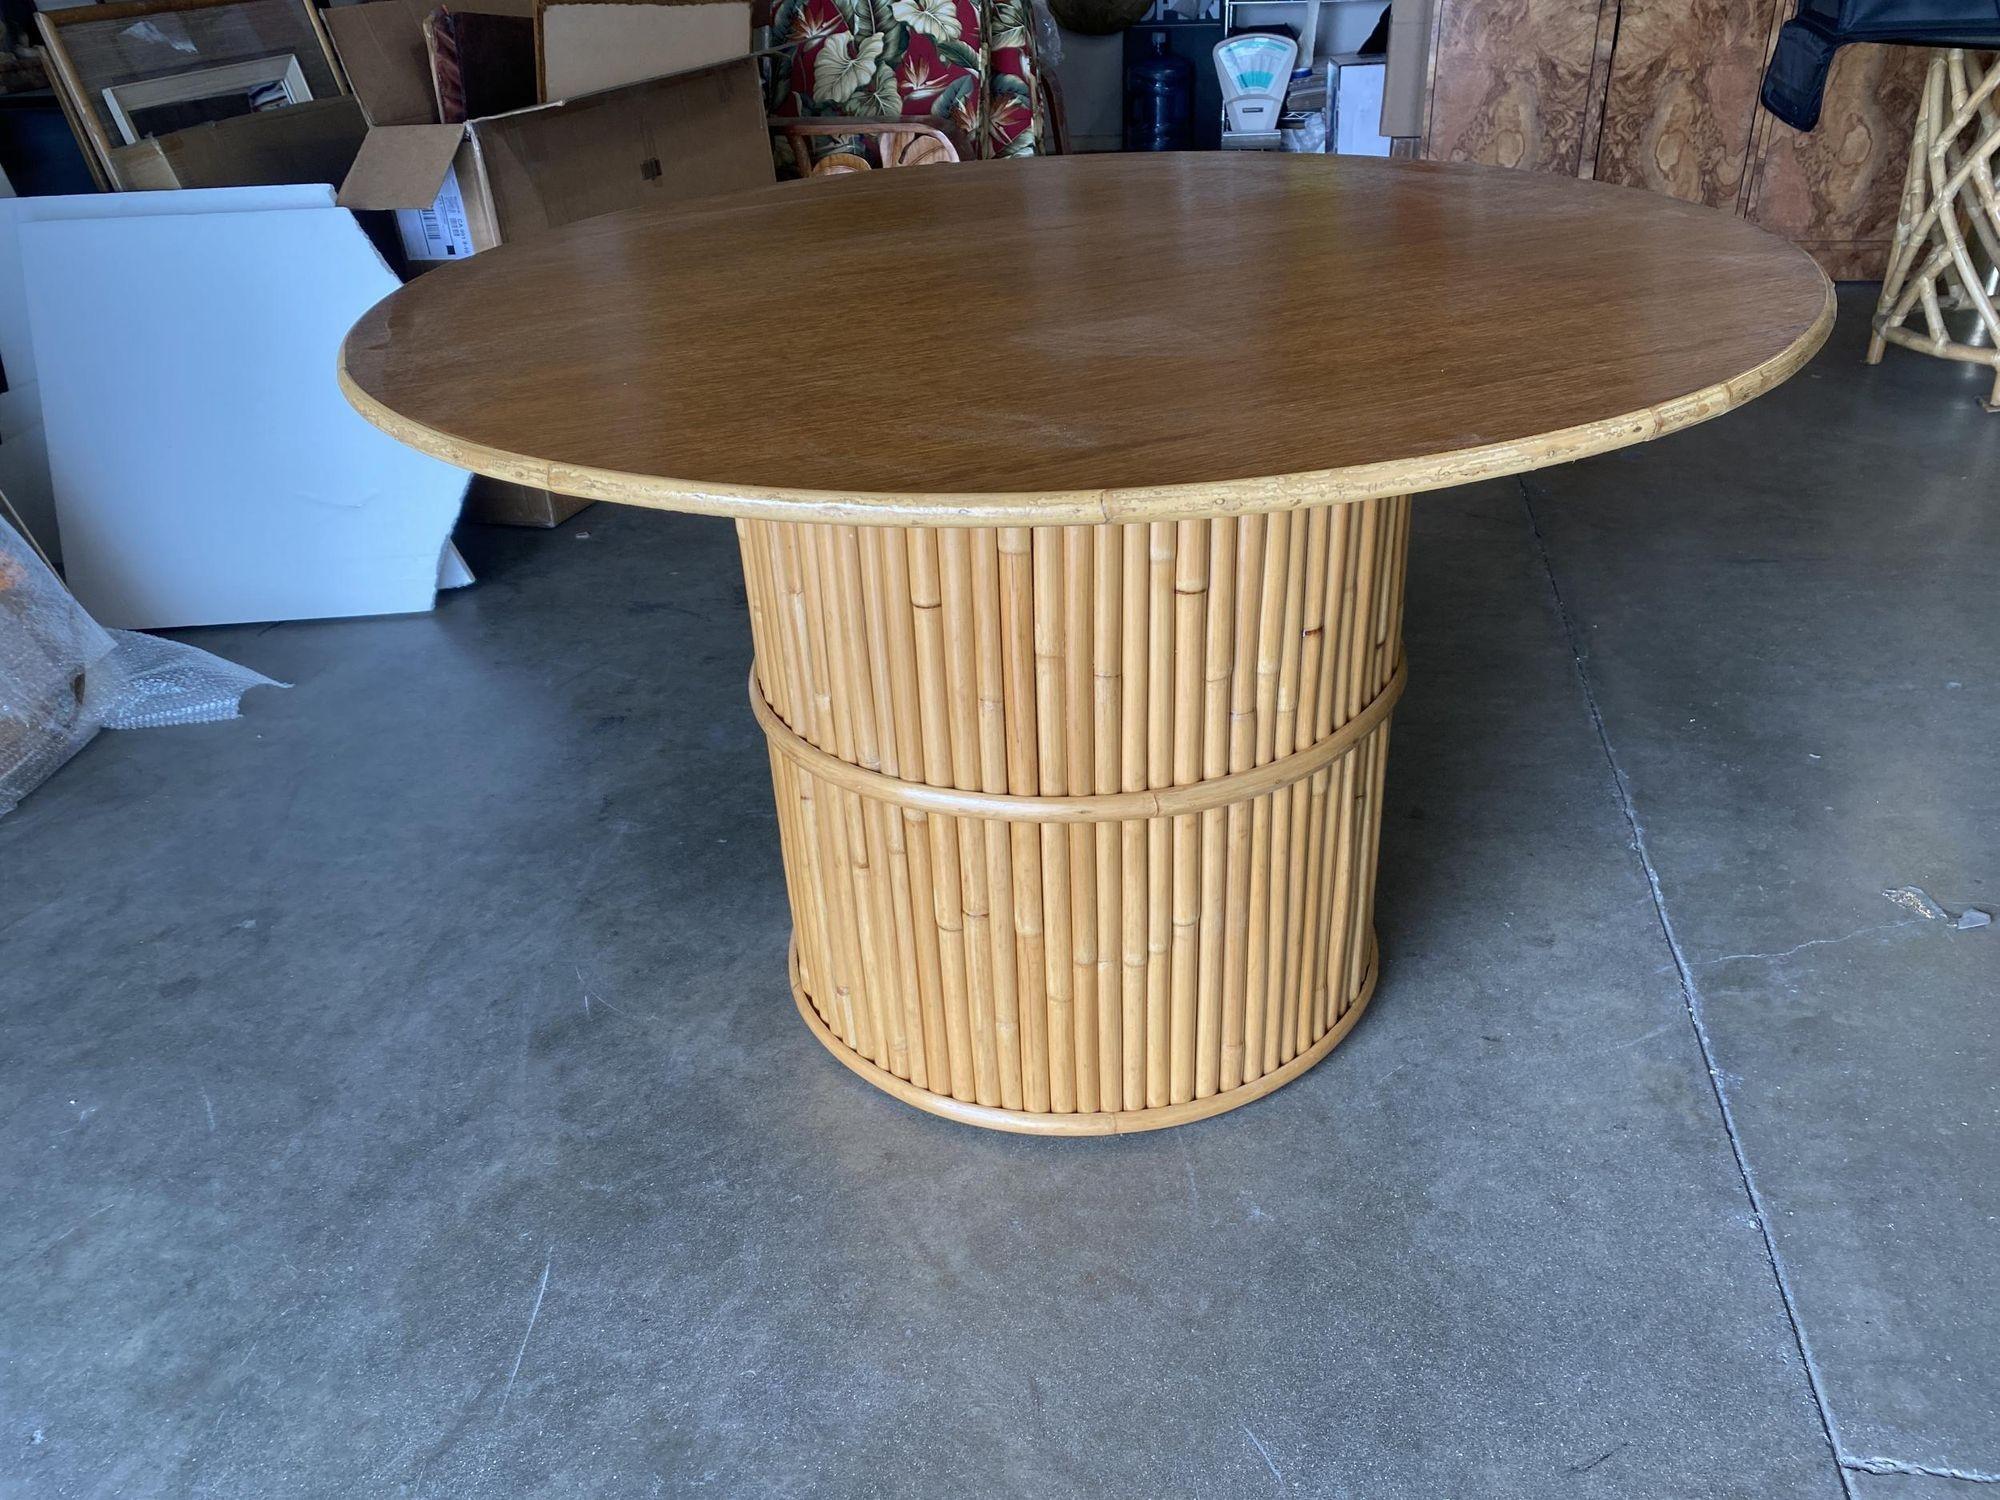 Restored Round Stacked Rattan Pedestal Dining Table Mahogany Top In Excellent Condition For Sale In Van Nuys, CA